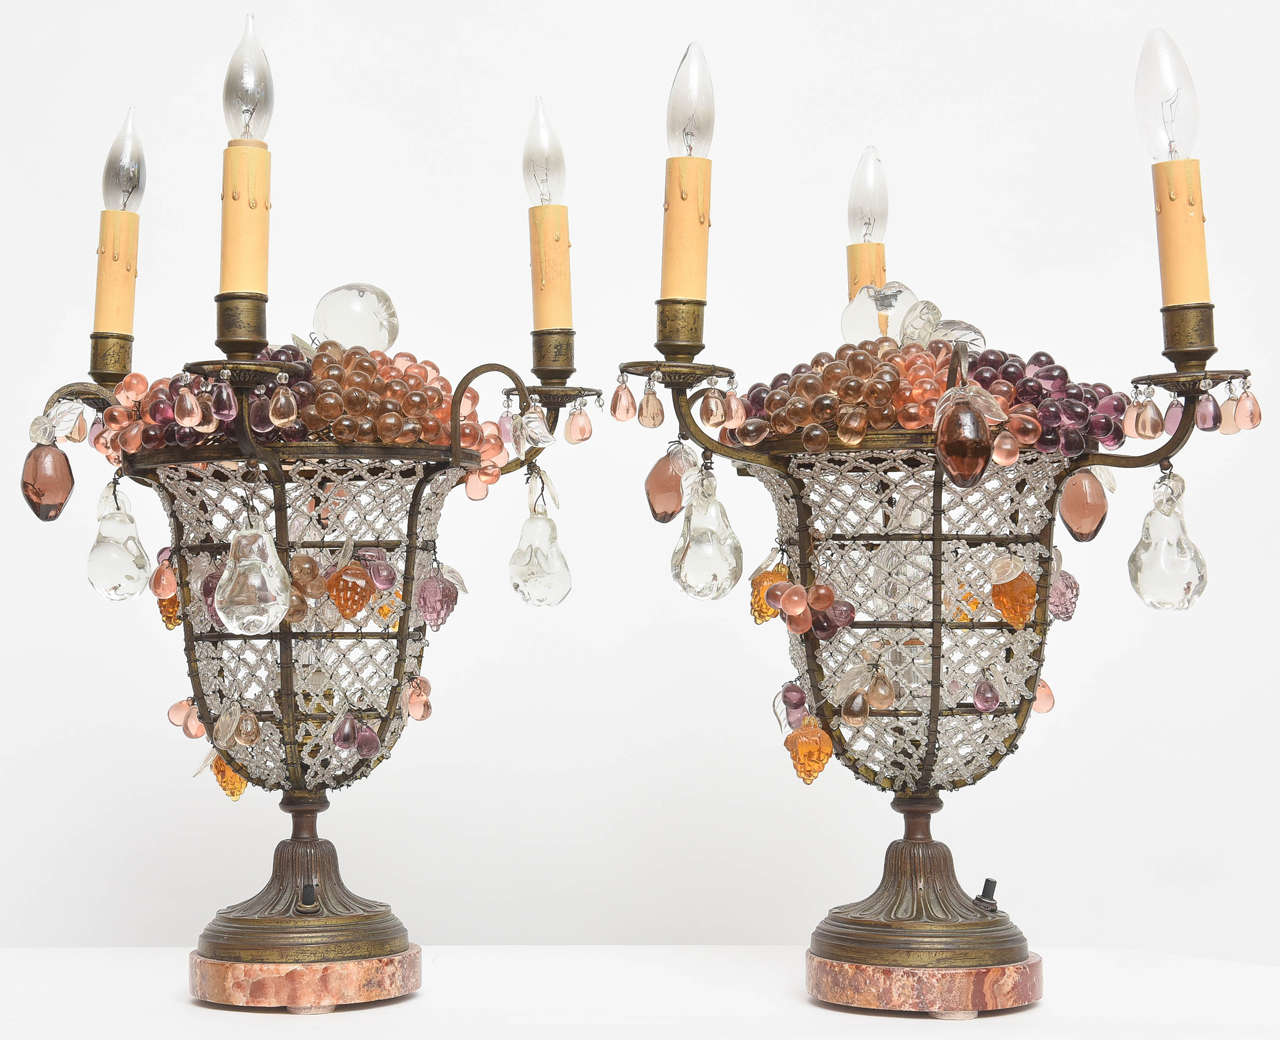 Exceptional pair of very large beaded urn lamps on marble bases. Various glass fruits adorn the basket and arms. Three lights on each.